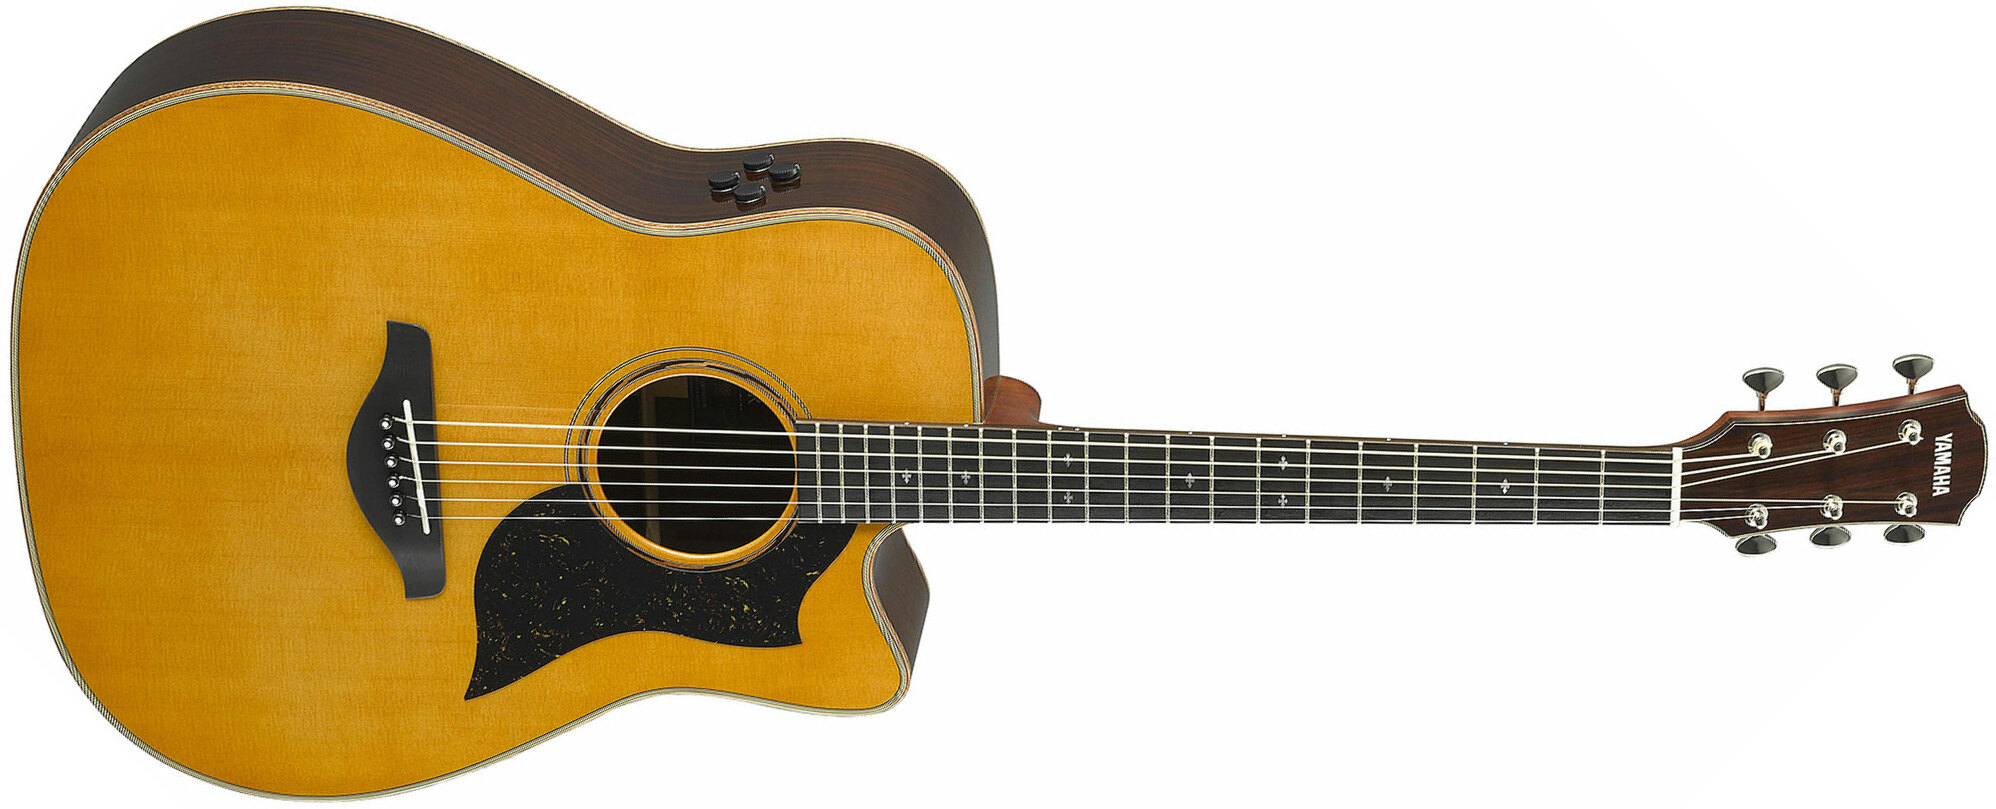 Yamaha A5r Are Vn Dreadnought Cw Epicea Palissandre Eb - Vintage Natural - Electro acoustic guitar - Main picture